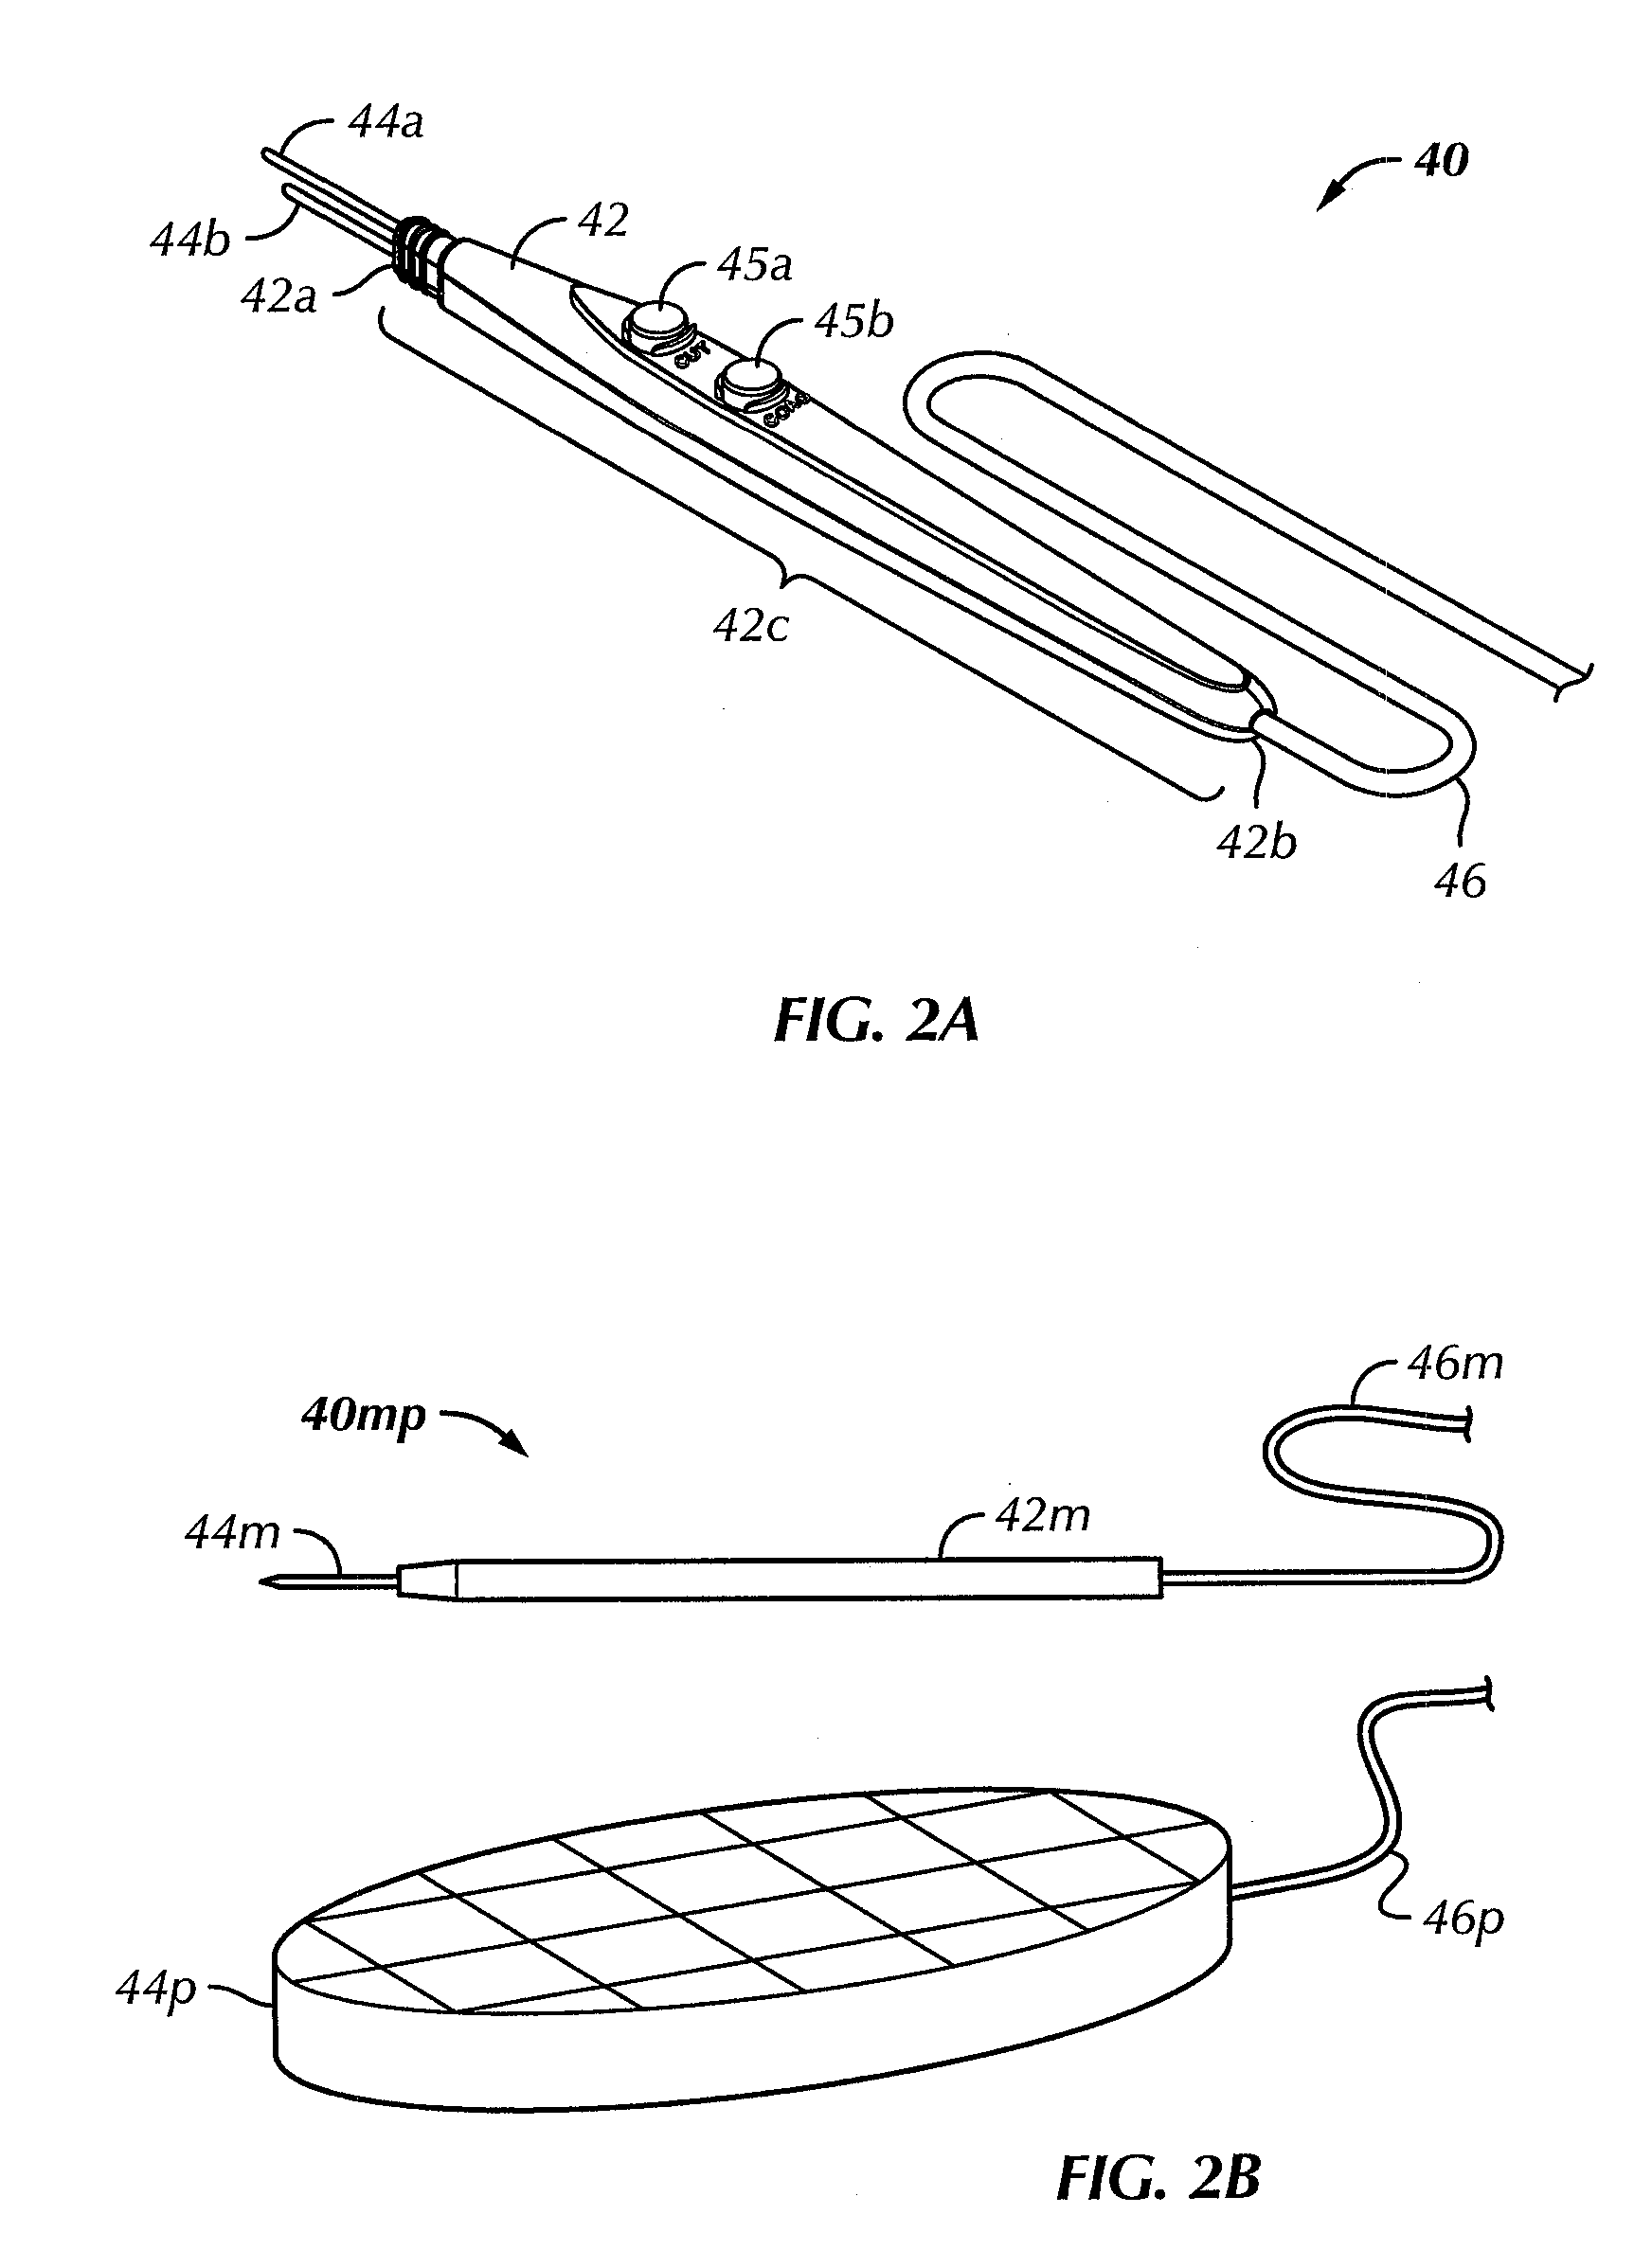 Electrosurgical Generator Having Boost Mode Control Based on Impedance